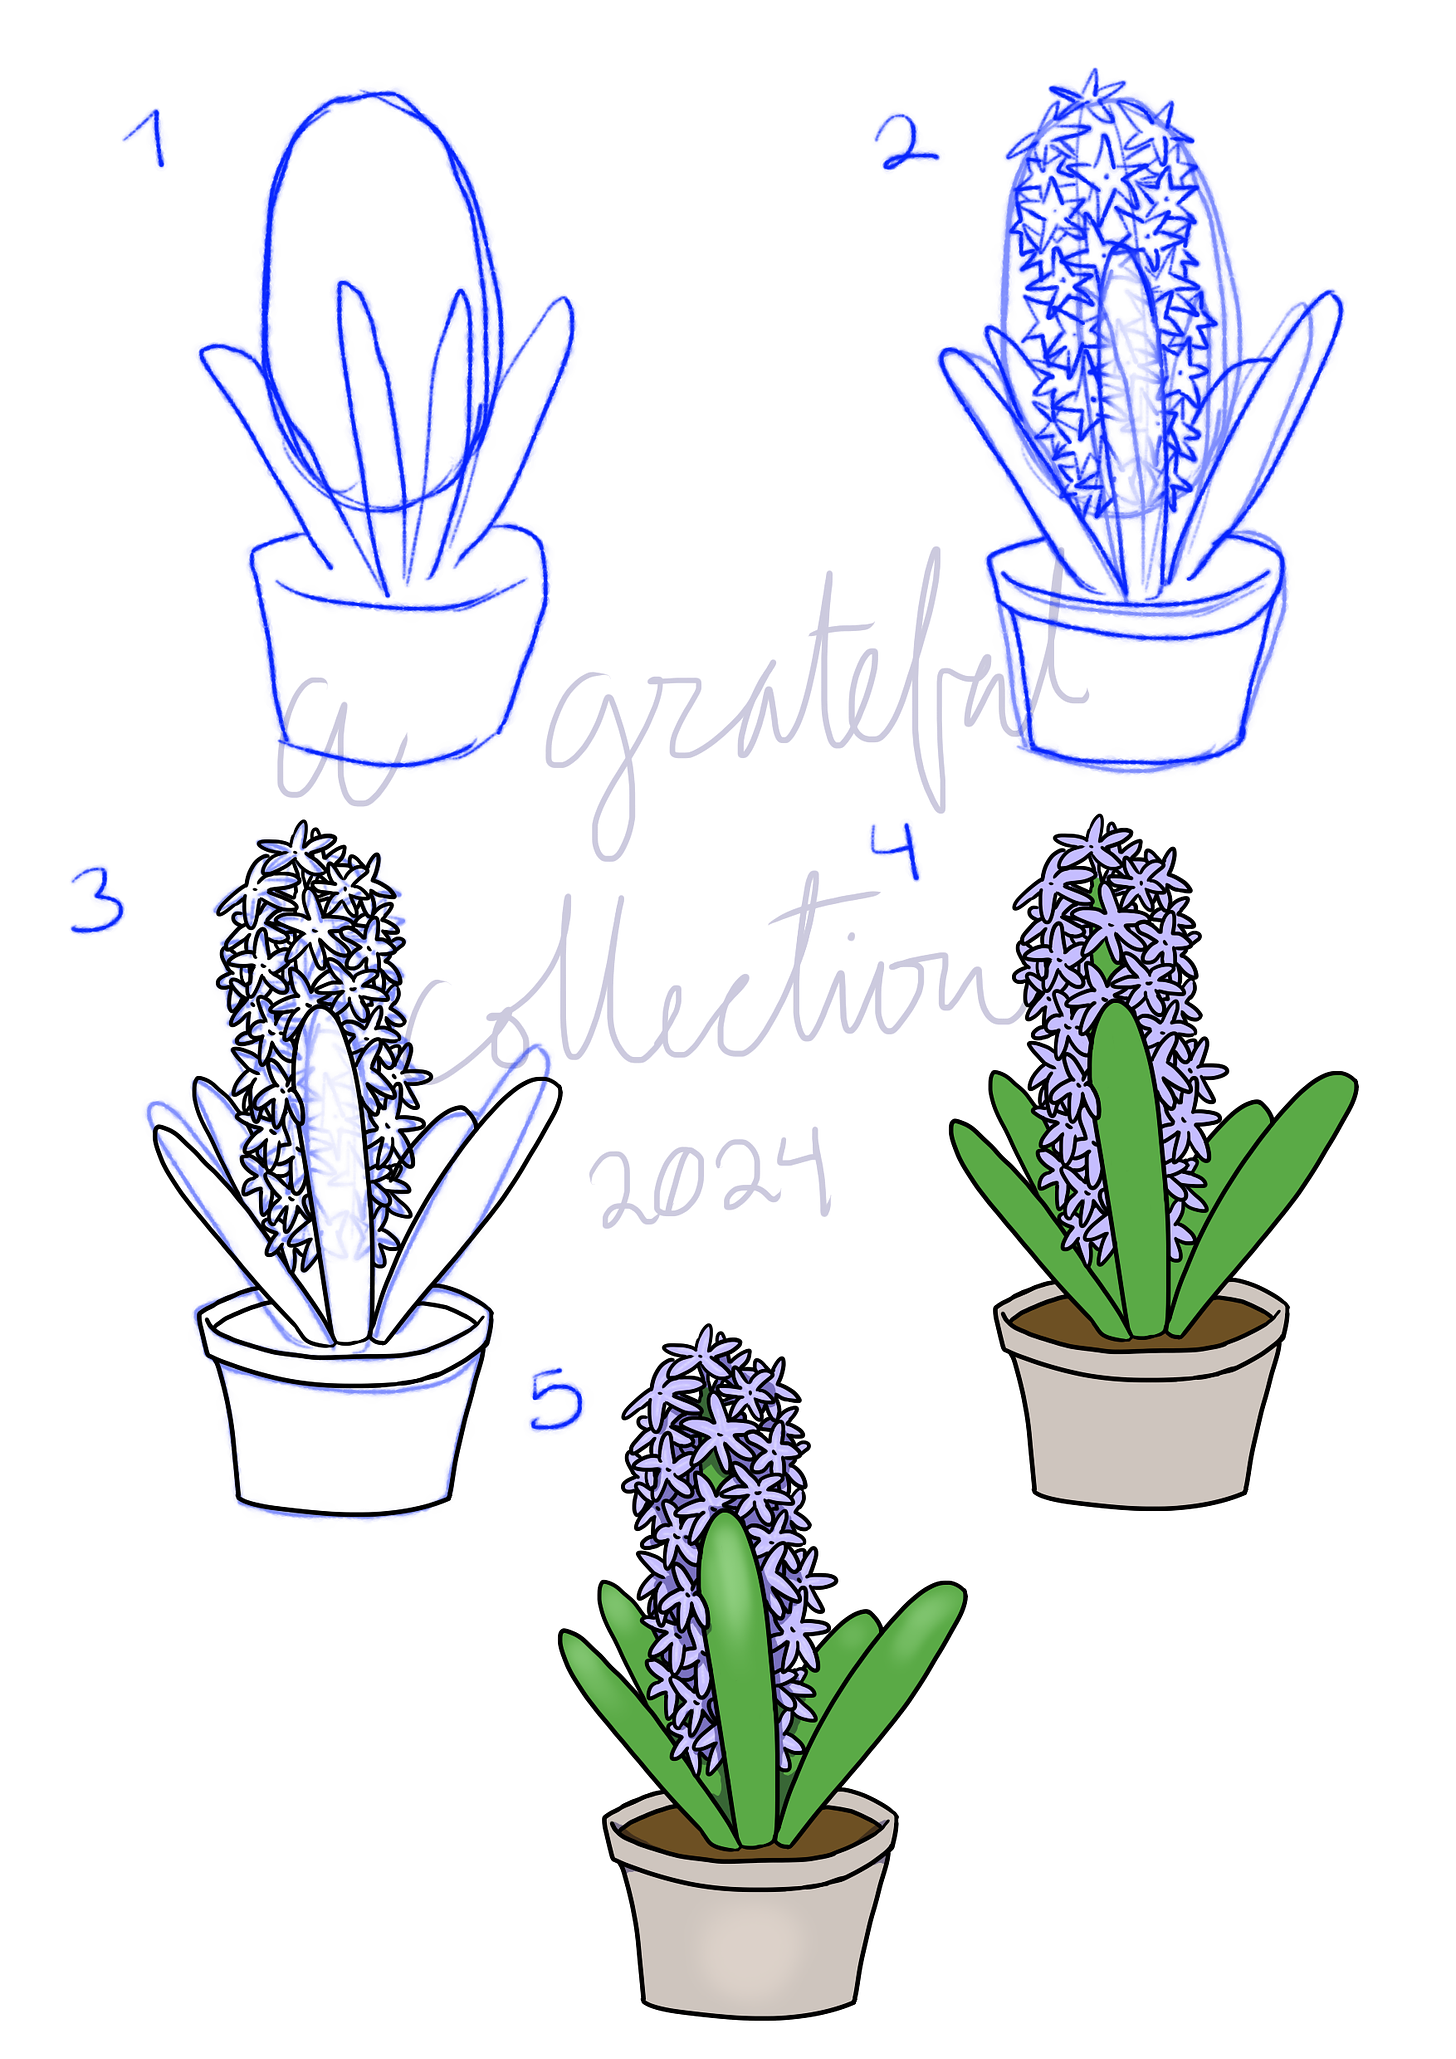 How to draw a hyacinth in 5 steps!